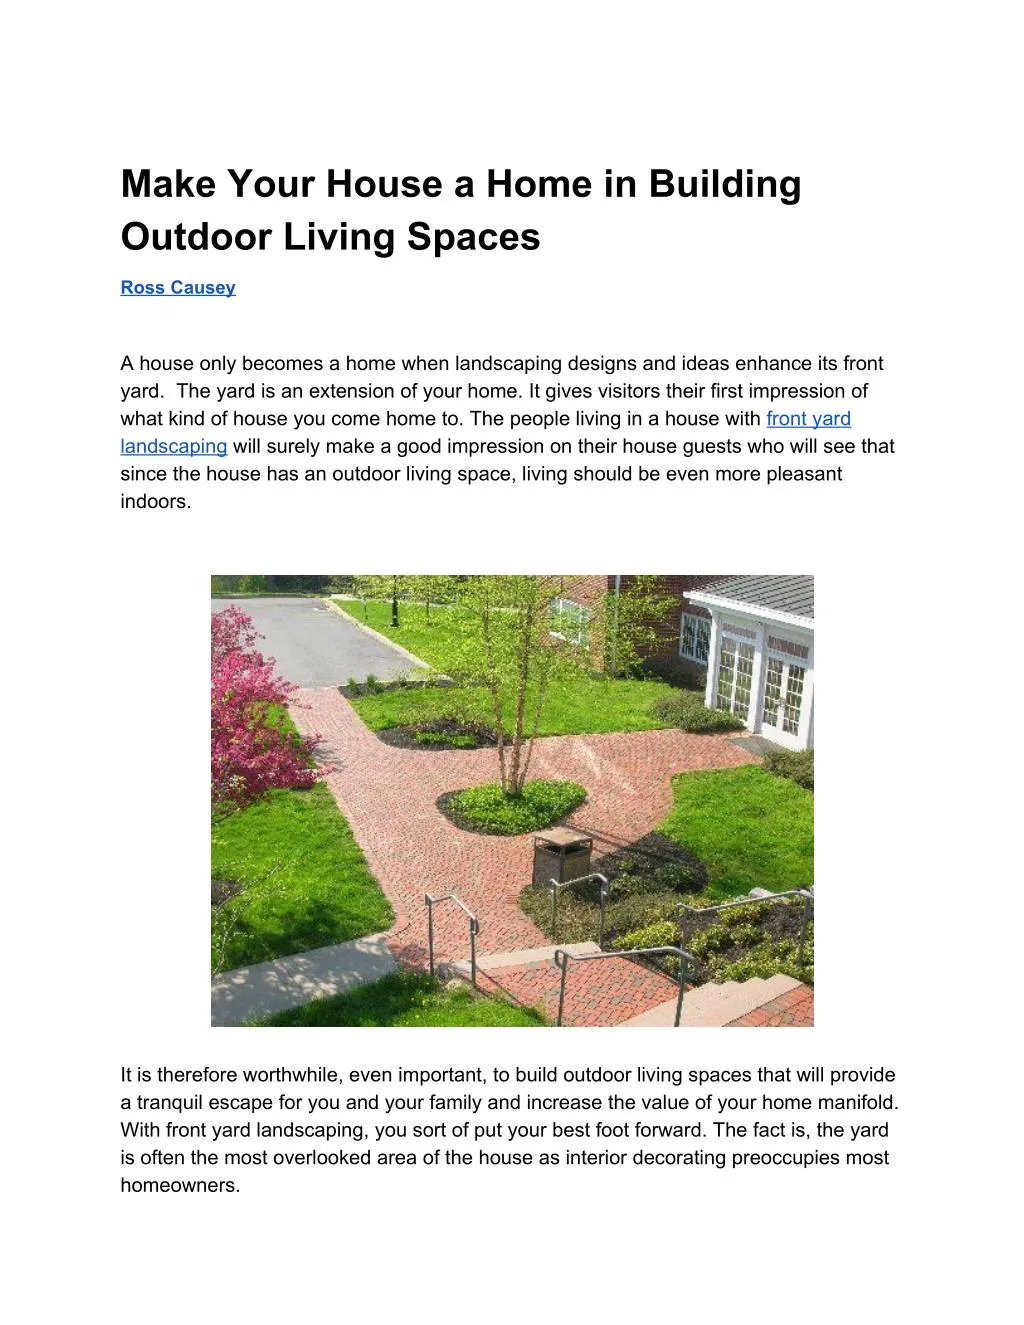 make your house a home in building outdoor living